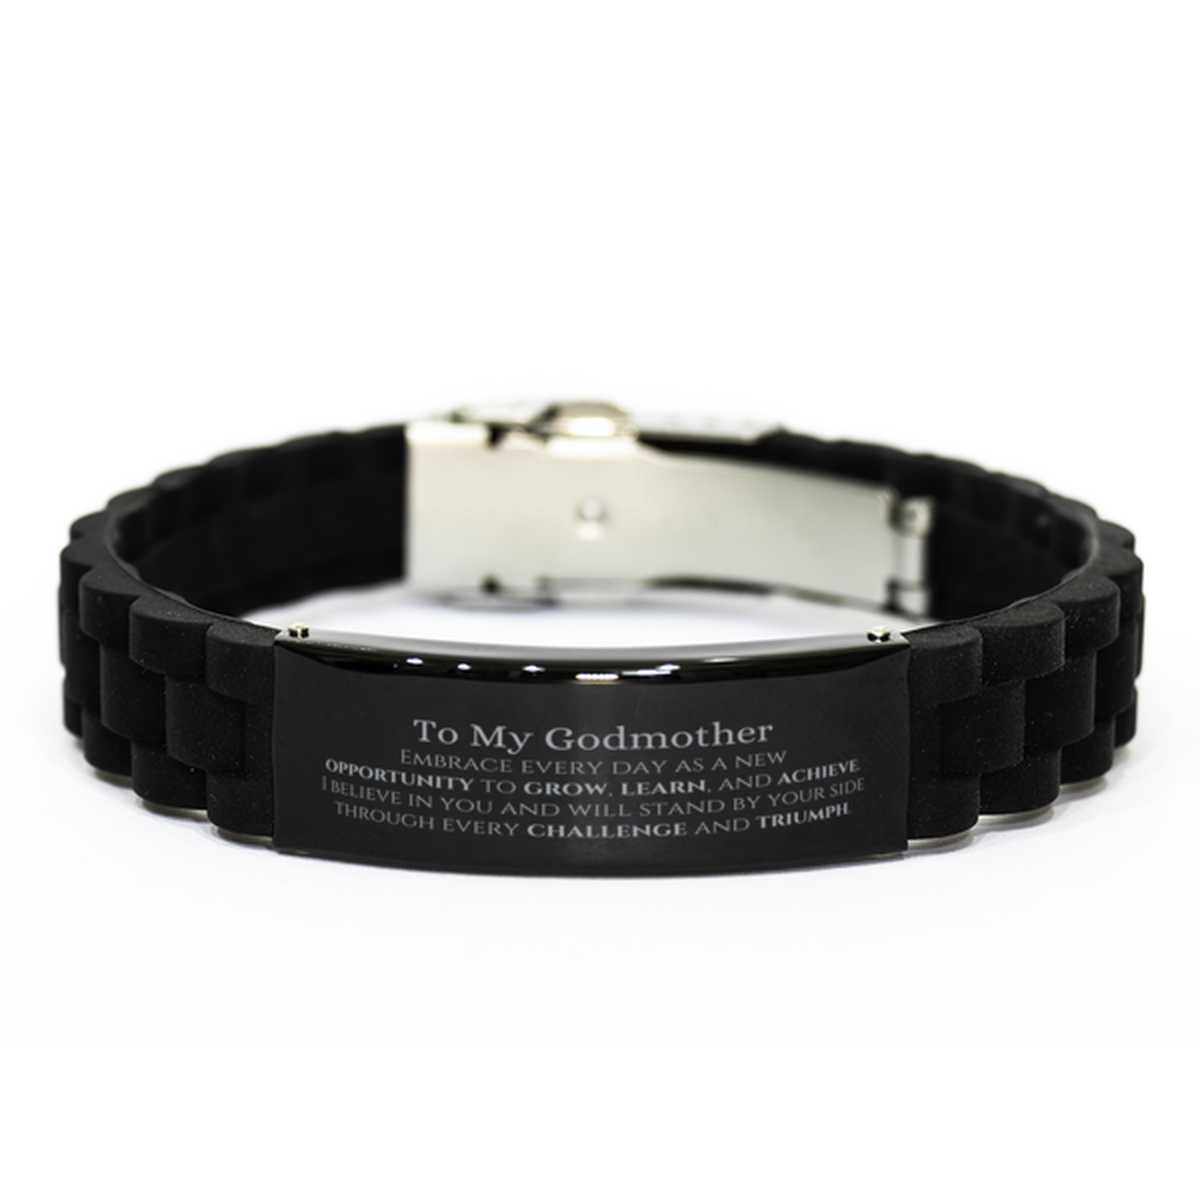 To My Godmother Gifts, I believe in you and will stand by your side, Inspirational Black Glidelock Clasp Bracelet For Godmother, Birthday Christmas Motivational Godmother Gifts